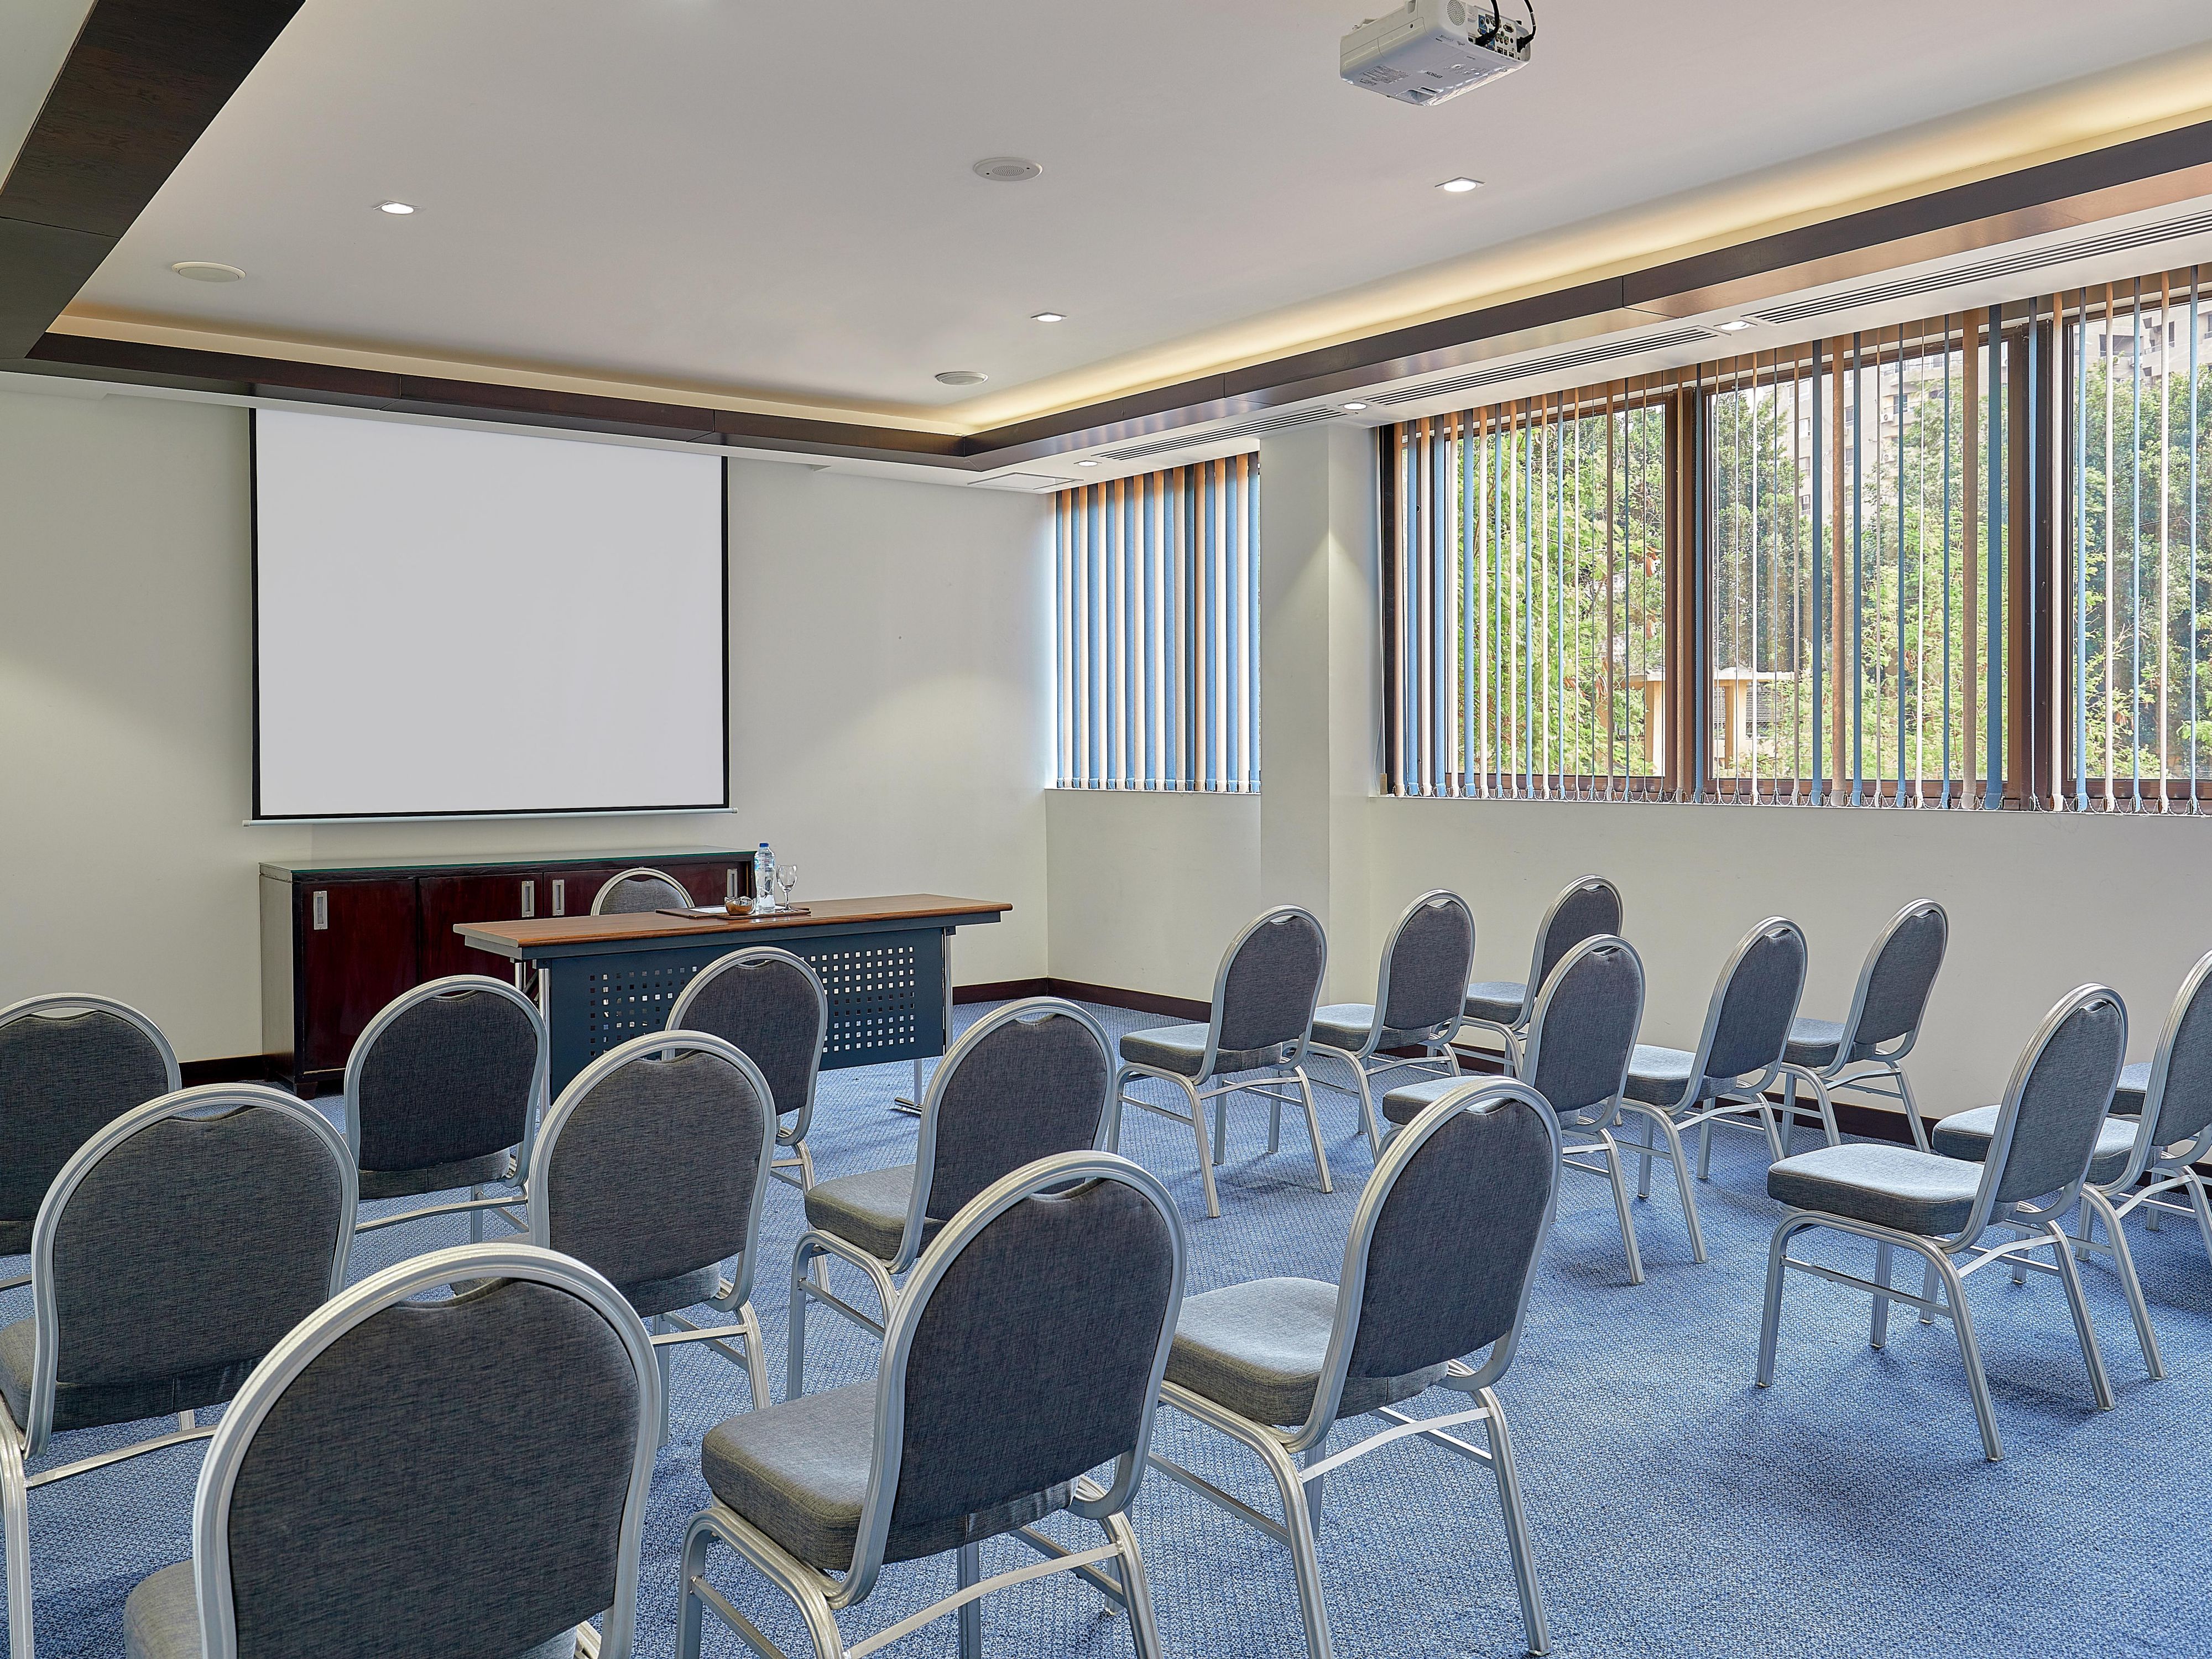 Cozy meetings, extensive seminars, or even trainings and many more, Holiday Inn & Suites Cairo Maadi's banquet rooms are there to fullfill all your requests. Our 14 highly equipped meeting rooms with their variety of spaces can serve all your demands, just leave it to our skillfull team who will handle everything with professionalism & success.